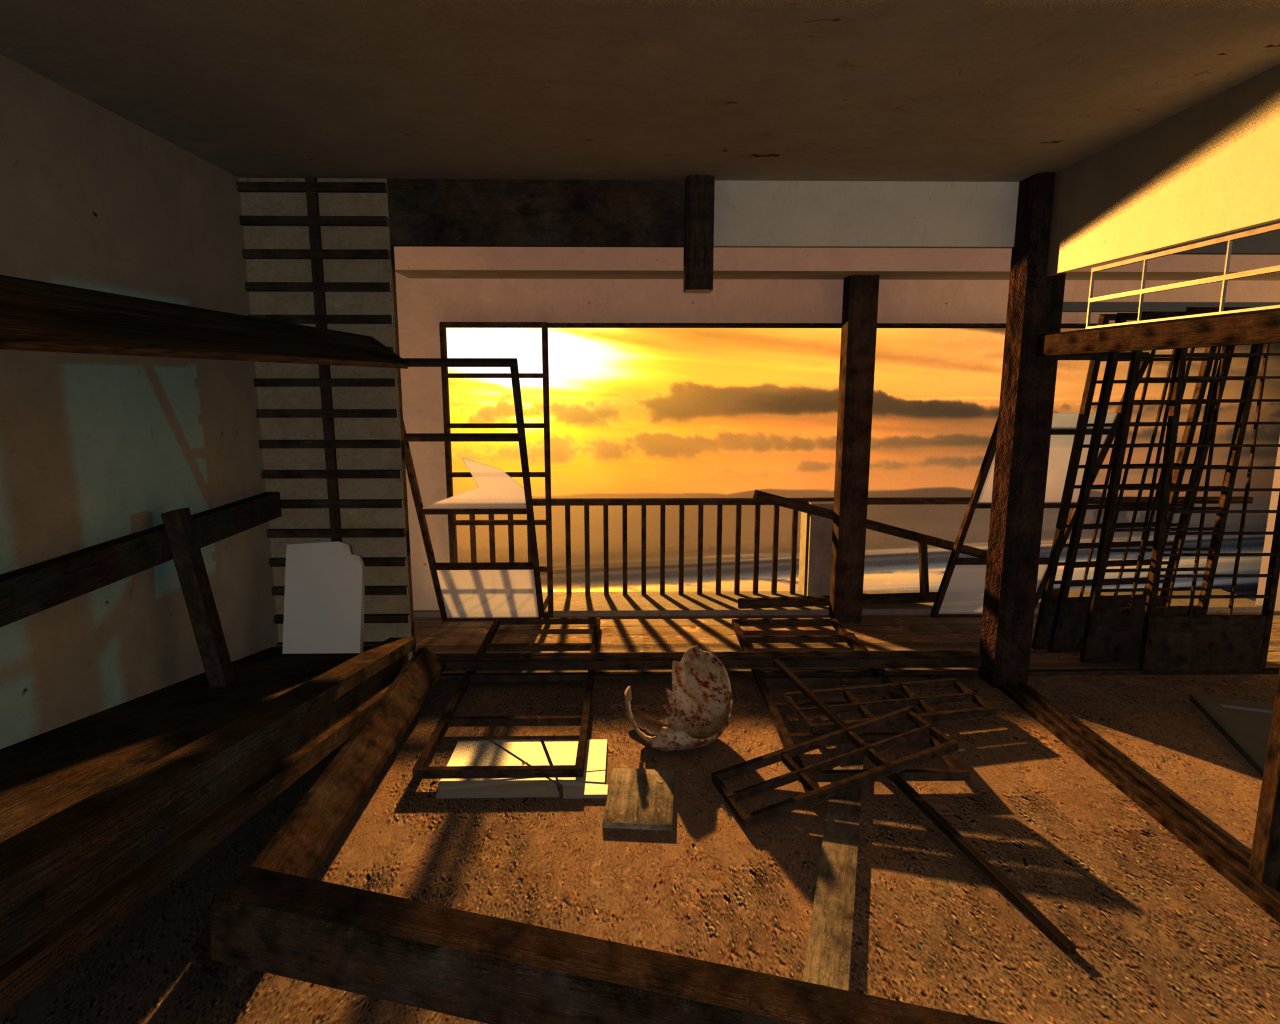 A 3D render of a decaying room with a sunset visible through the balcony. Wooden beams, broken ceramics and the remains of door panels litter the floor.